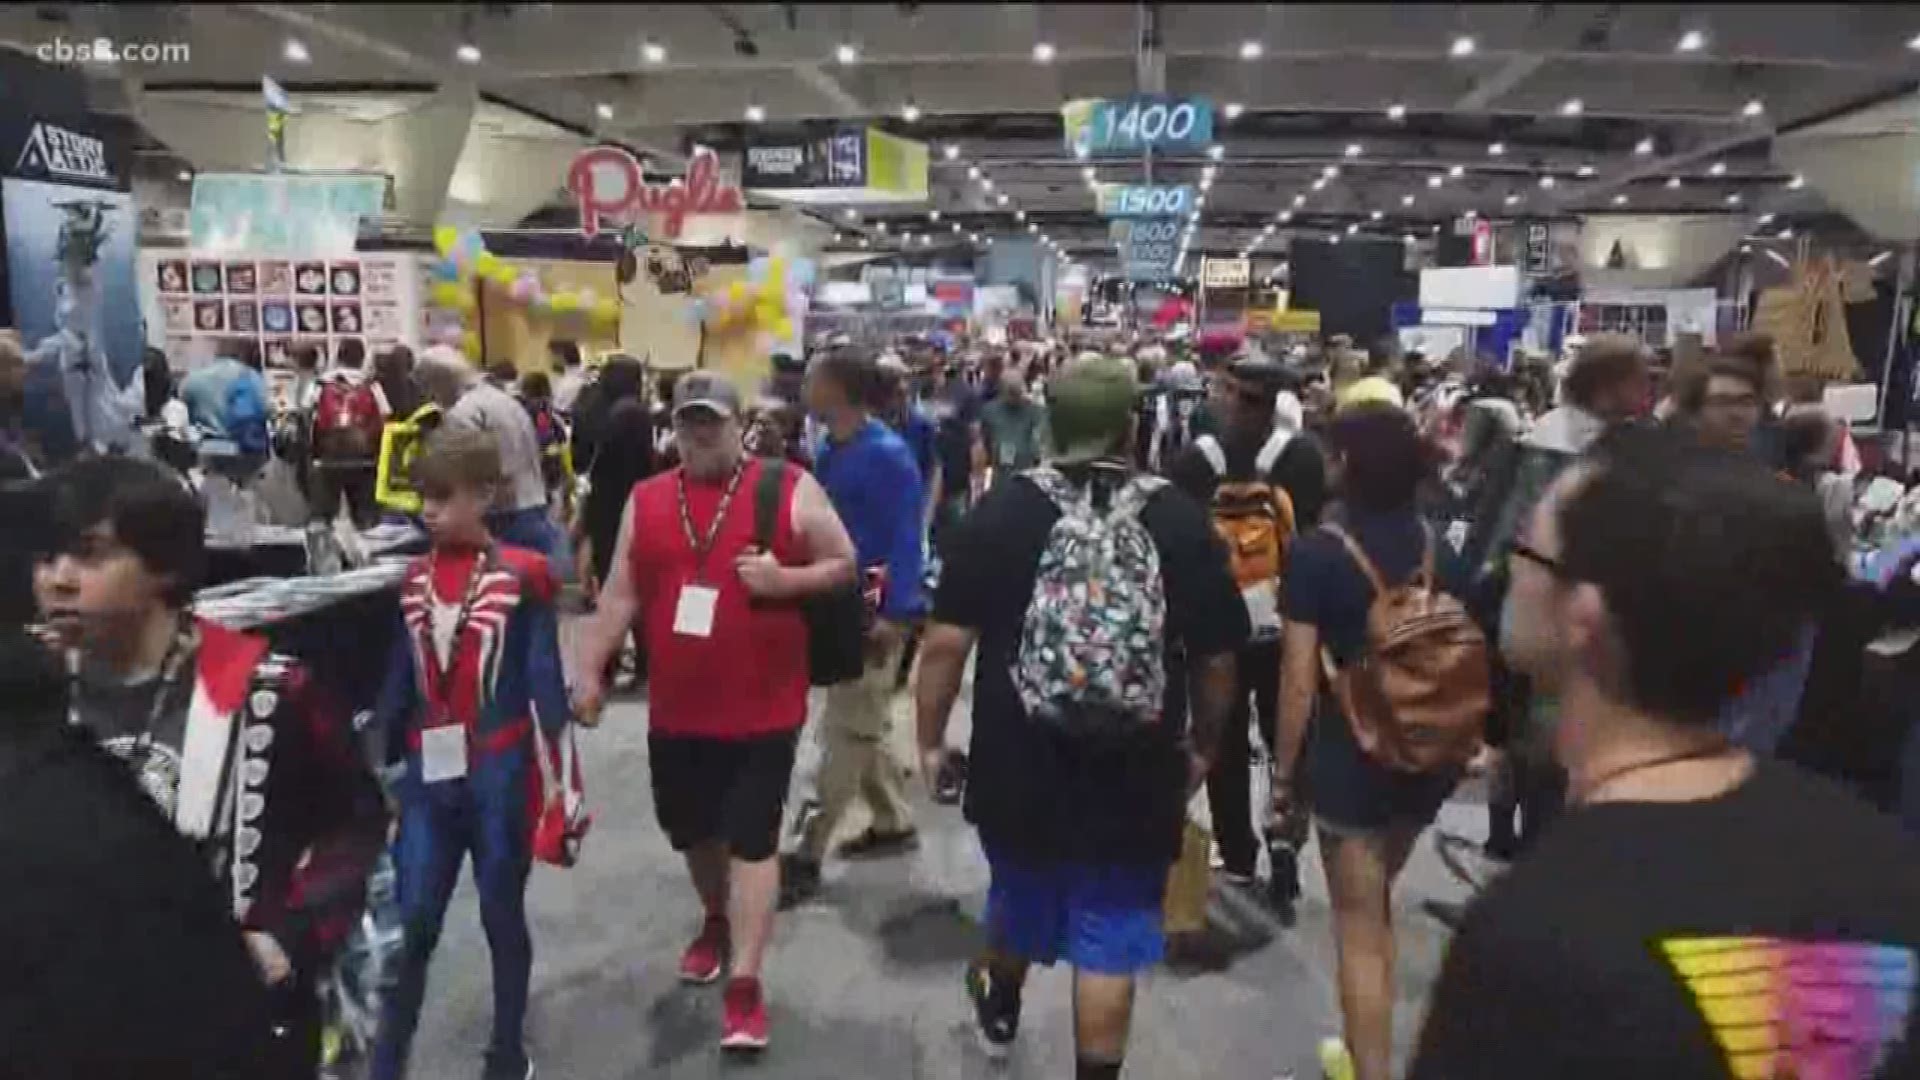 News 8's Shannon Handy gives us an inside look at the Convention Center during the San Diego Comic-Con 2019